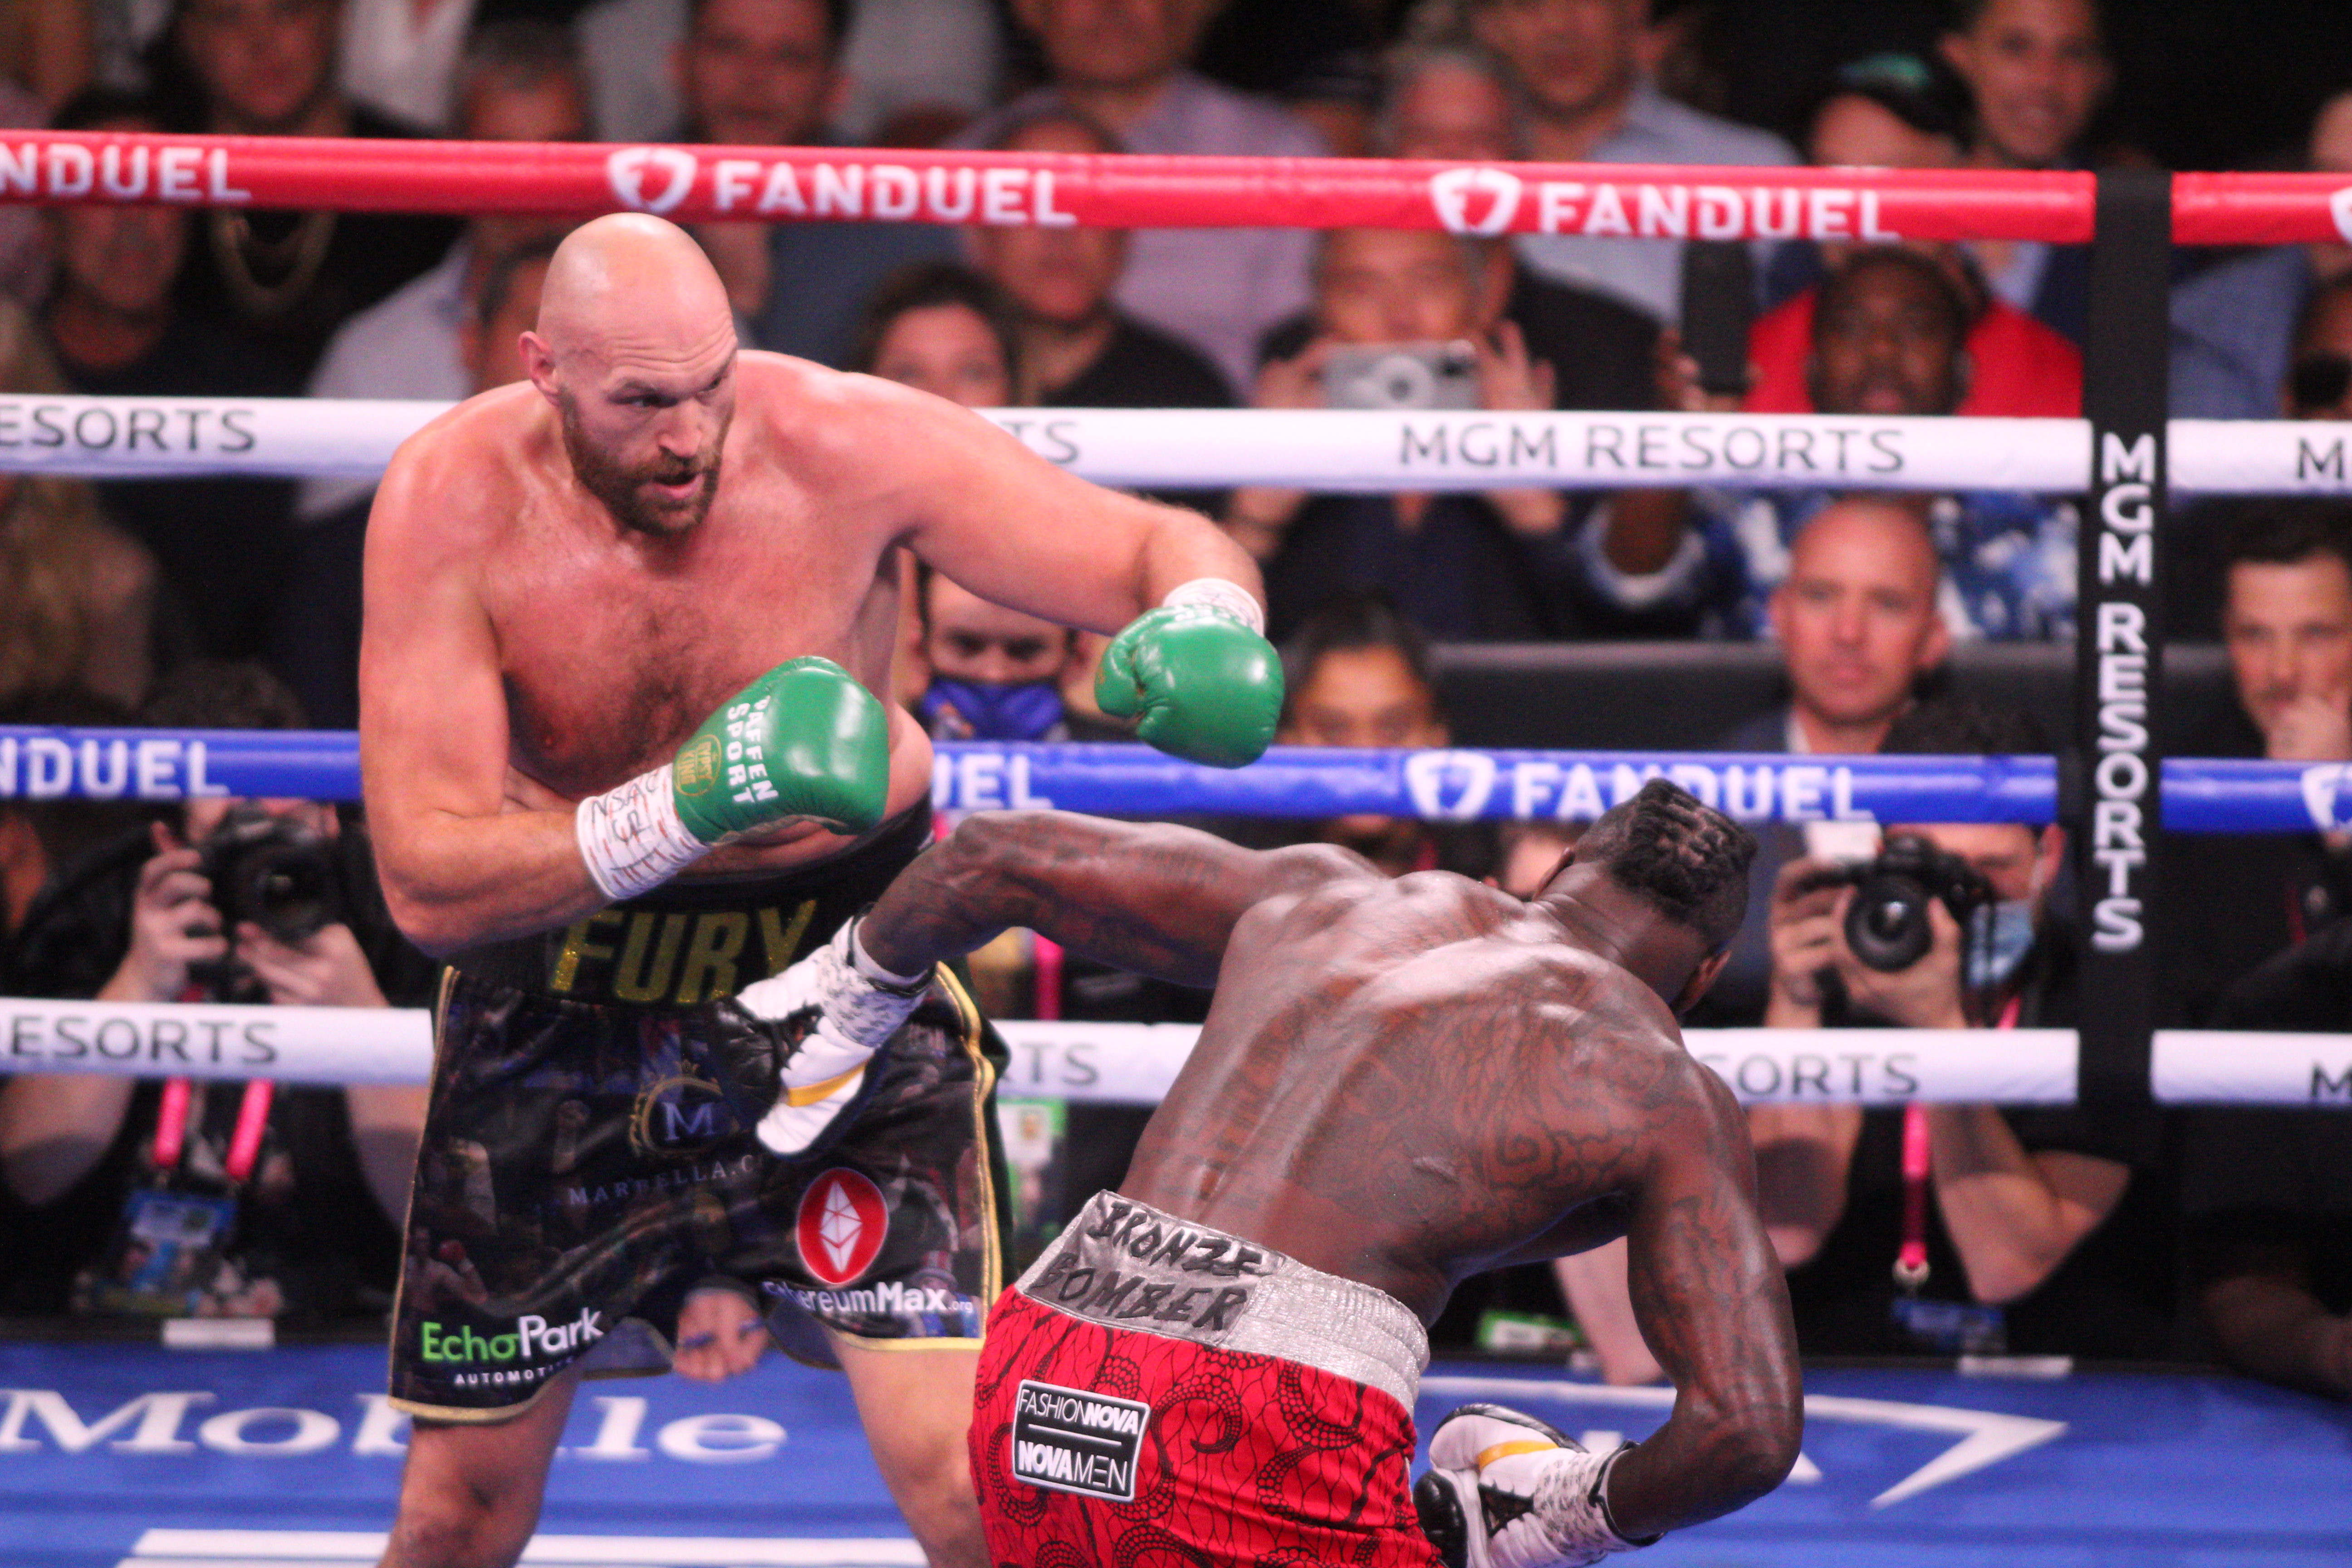 Tyson Fury says Deontay Wilder refused to show ‘sportsmanship’ after he knocked out American in third fight – CNBC